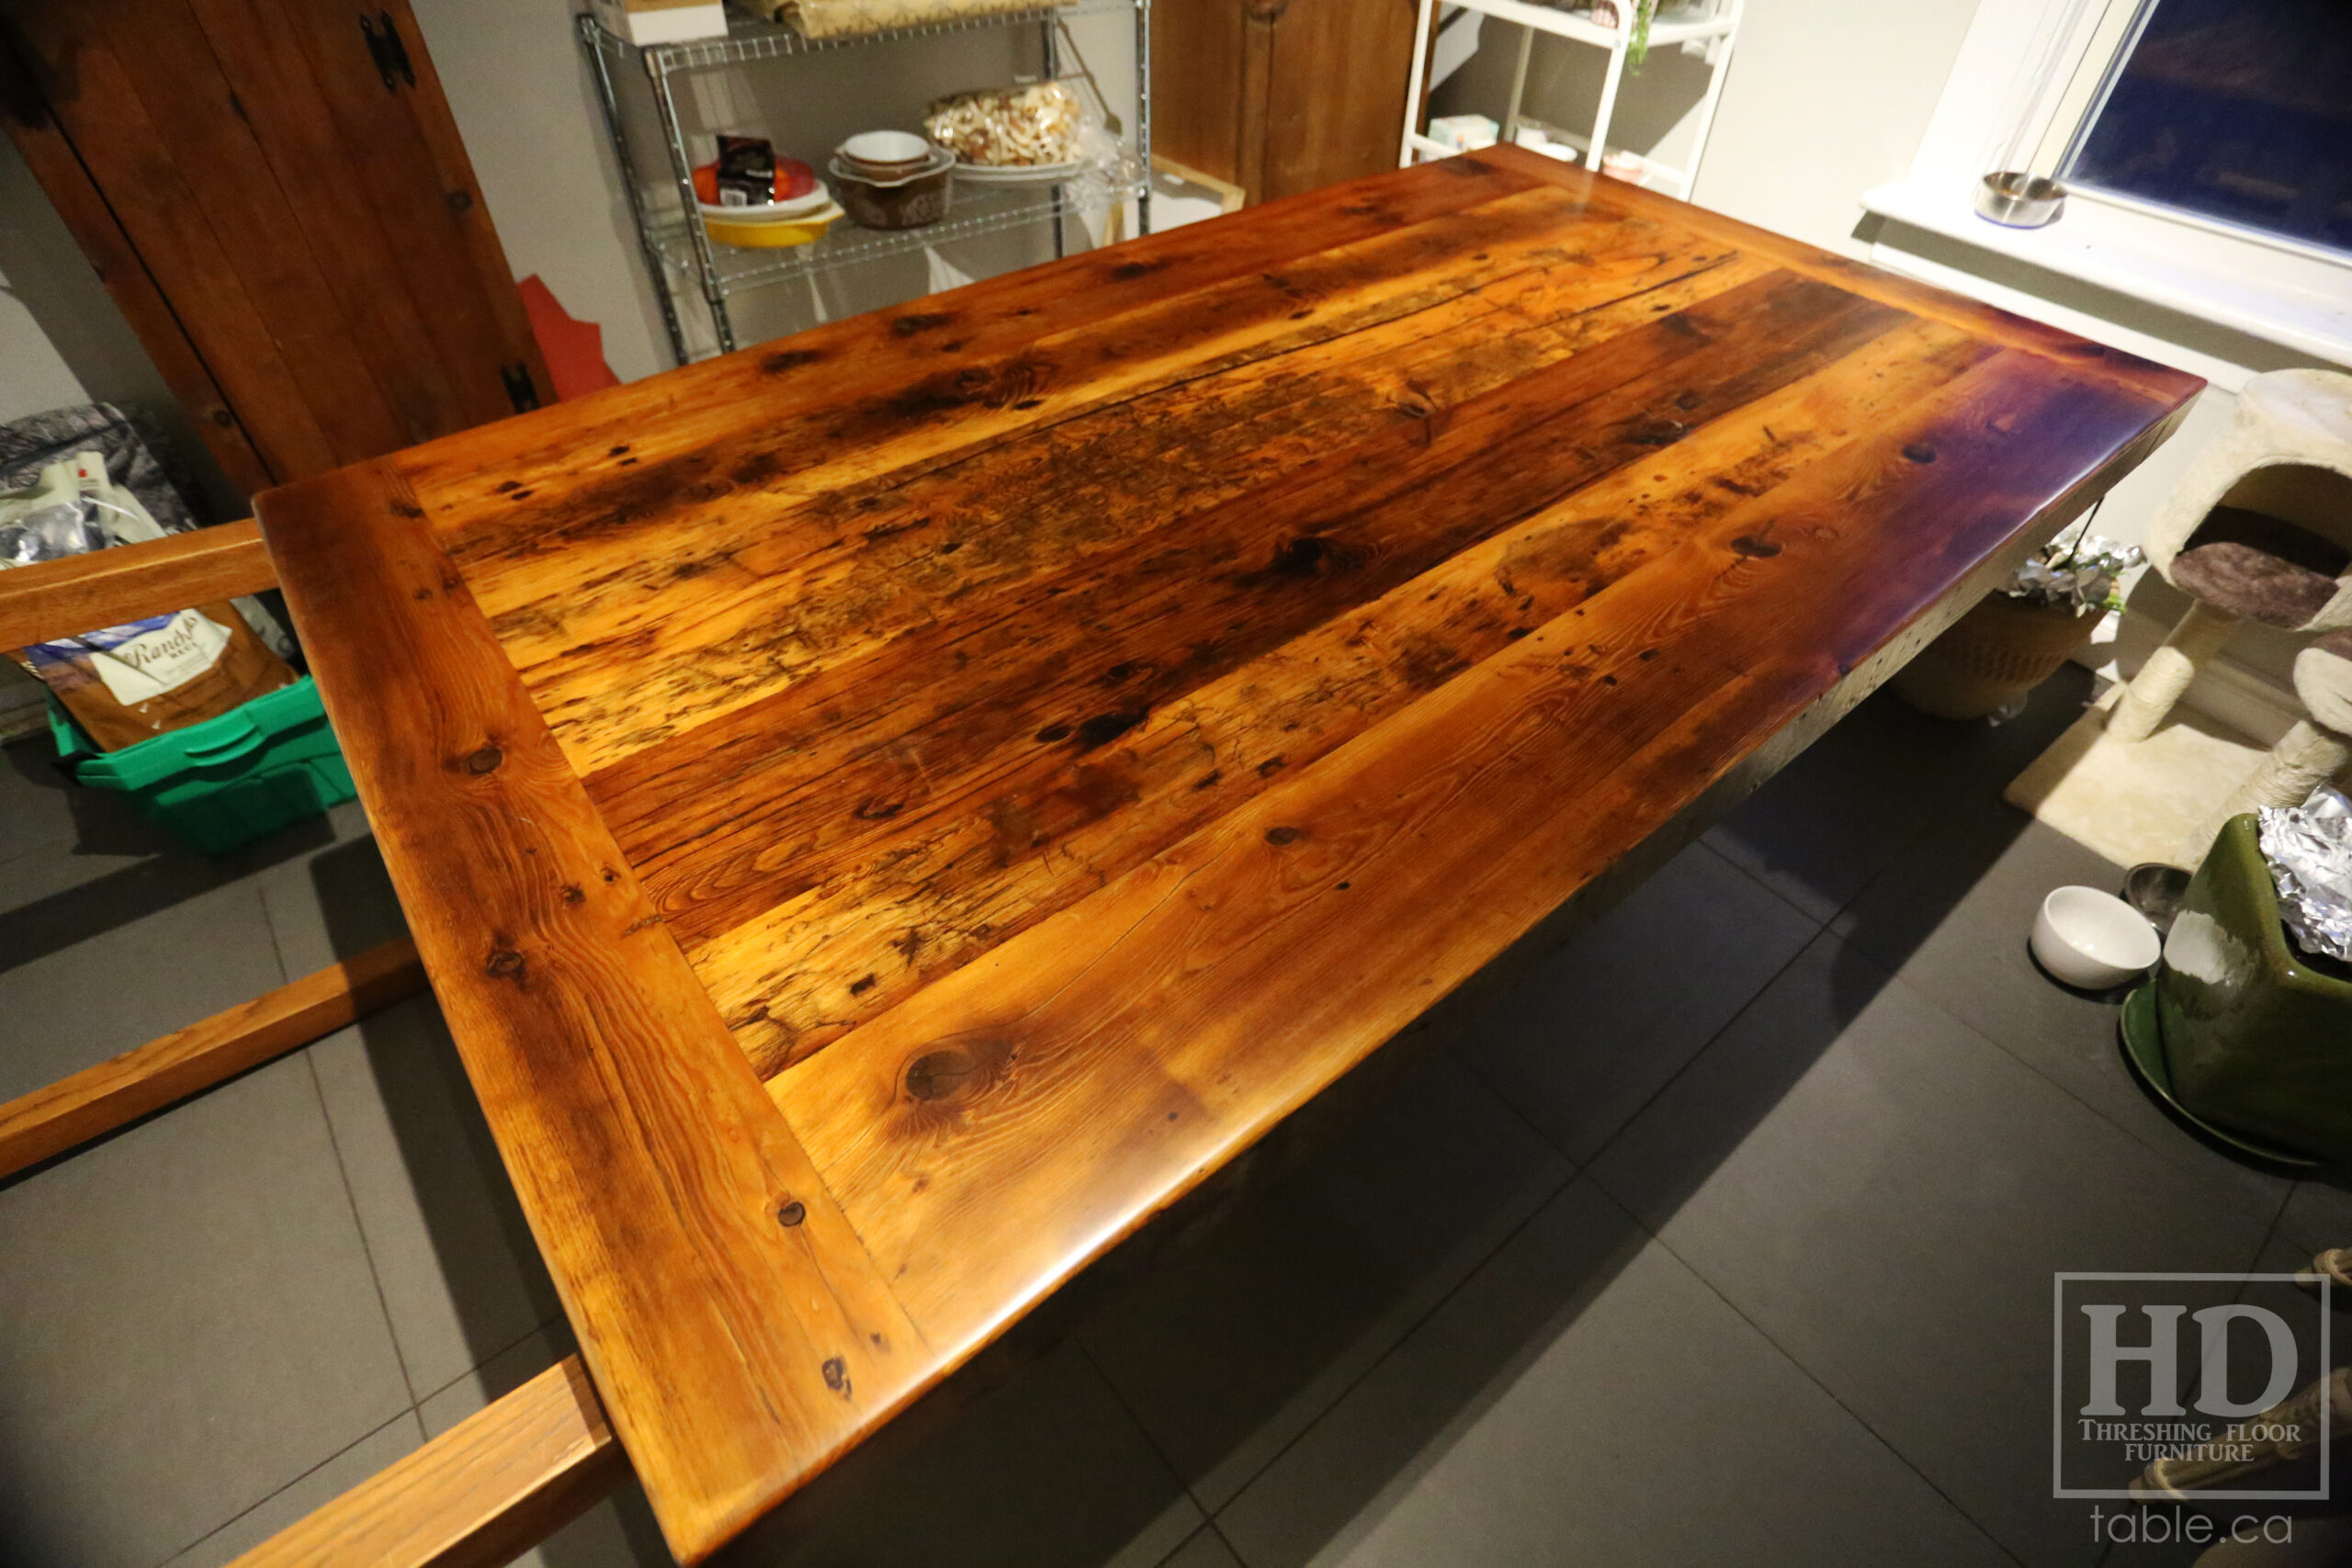 6' Reclaimed Ontario Barnwood Table we made for a Guelph home - 42" wide - 3" Joist Material Top Option - Metal U Shaped Stainless Base - Old Growth Hemlock Threshing Floor Construction - Original edges & distressing maintained - Premium epoxy + satin polyurethane finish - www.table.ca